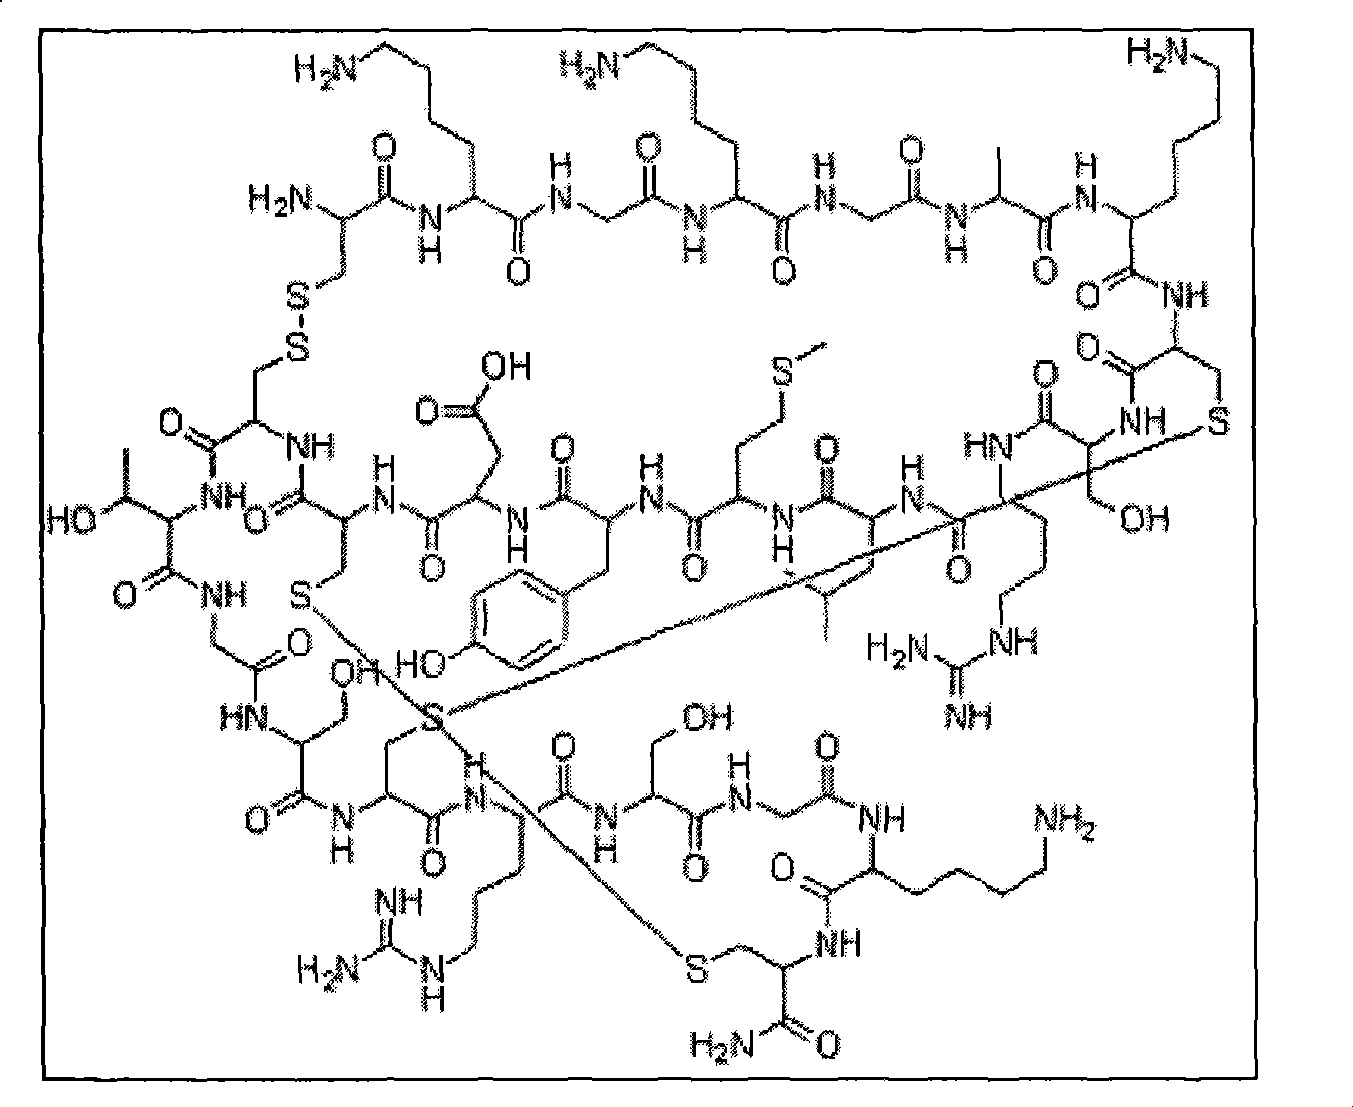 Solid phase synthesis method of ziconotide